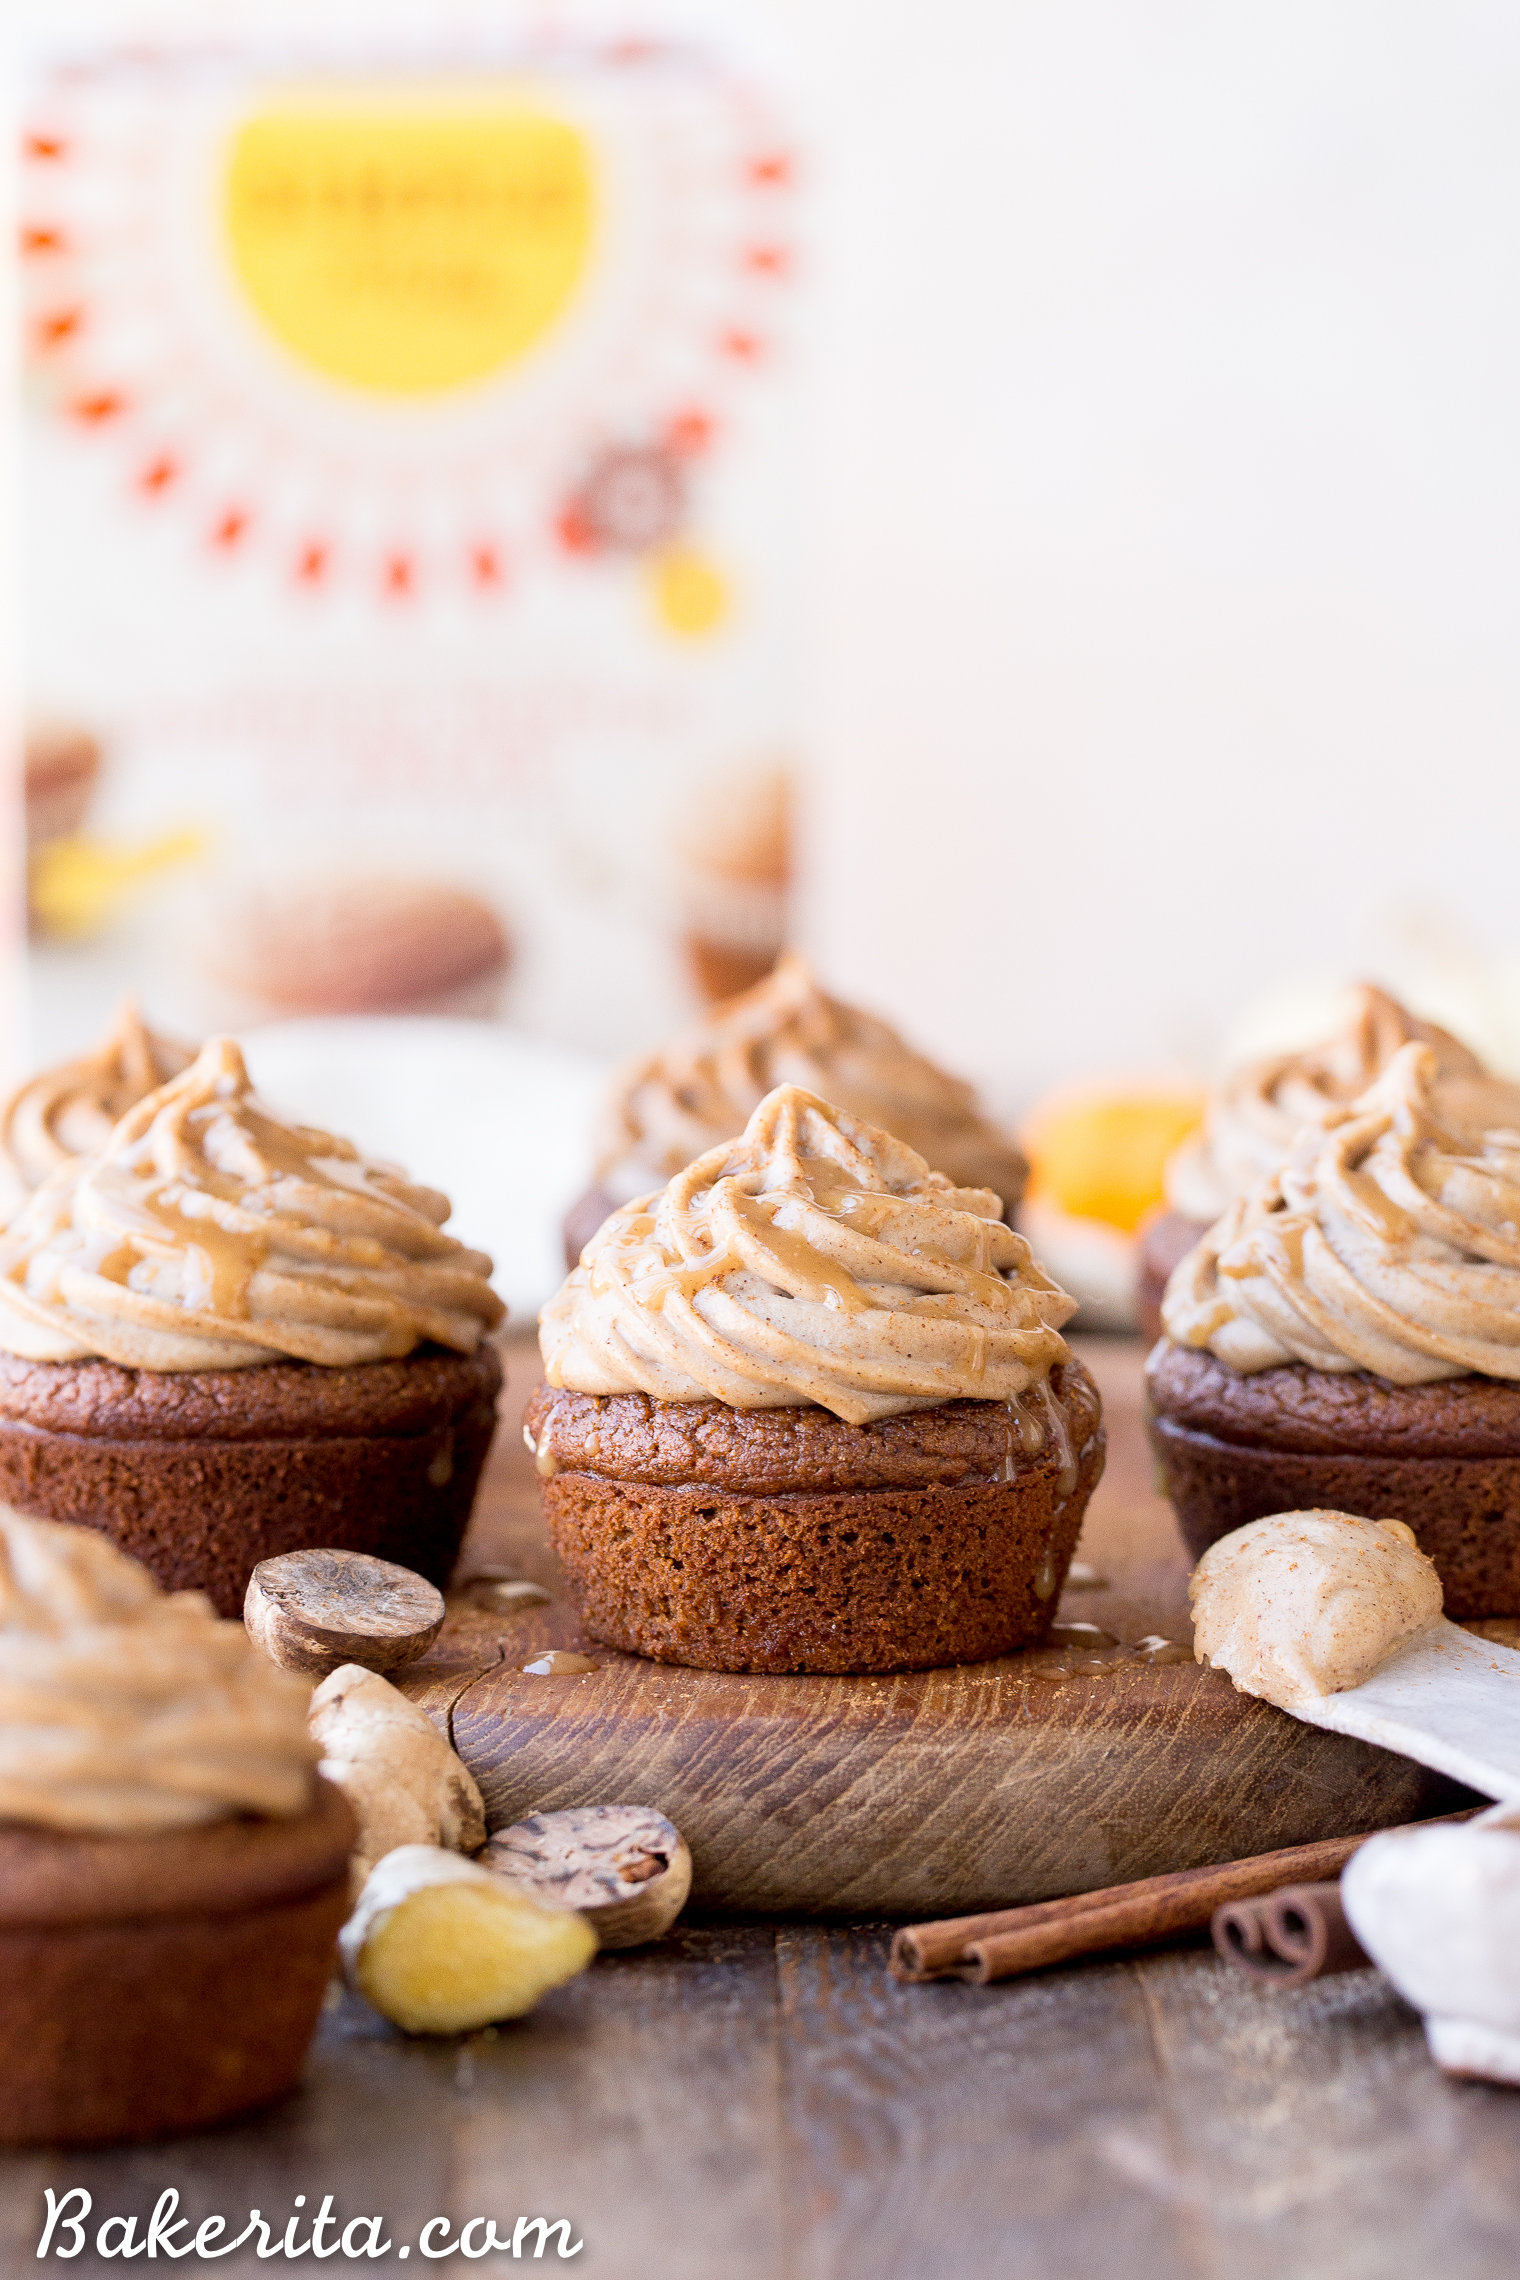 These Pumpkin Chai Cupcakes are soft, moist and bursting with warm chai spices and pumpkin flavor. They're topped with an irresistible cashew-based chai frosting that you'd never guess is paleo + vegan.